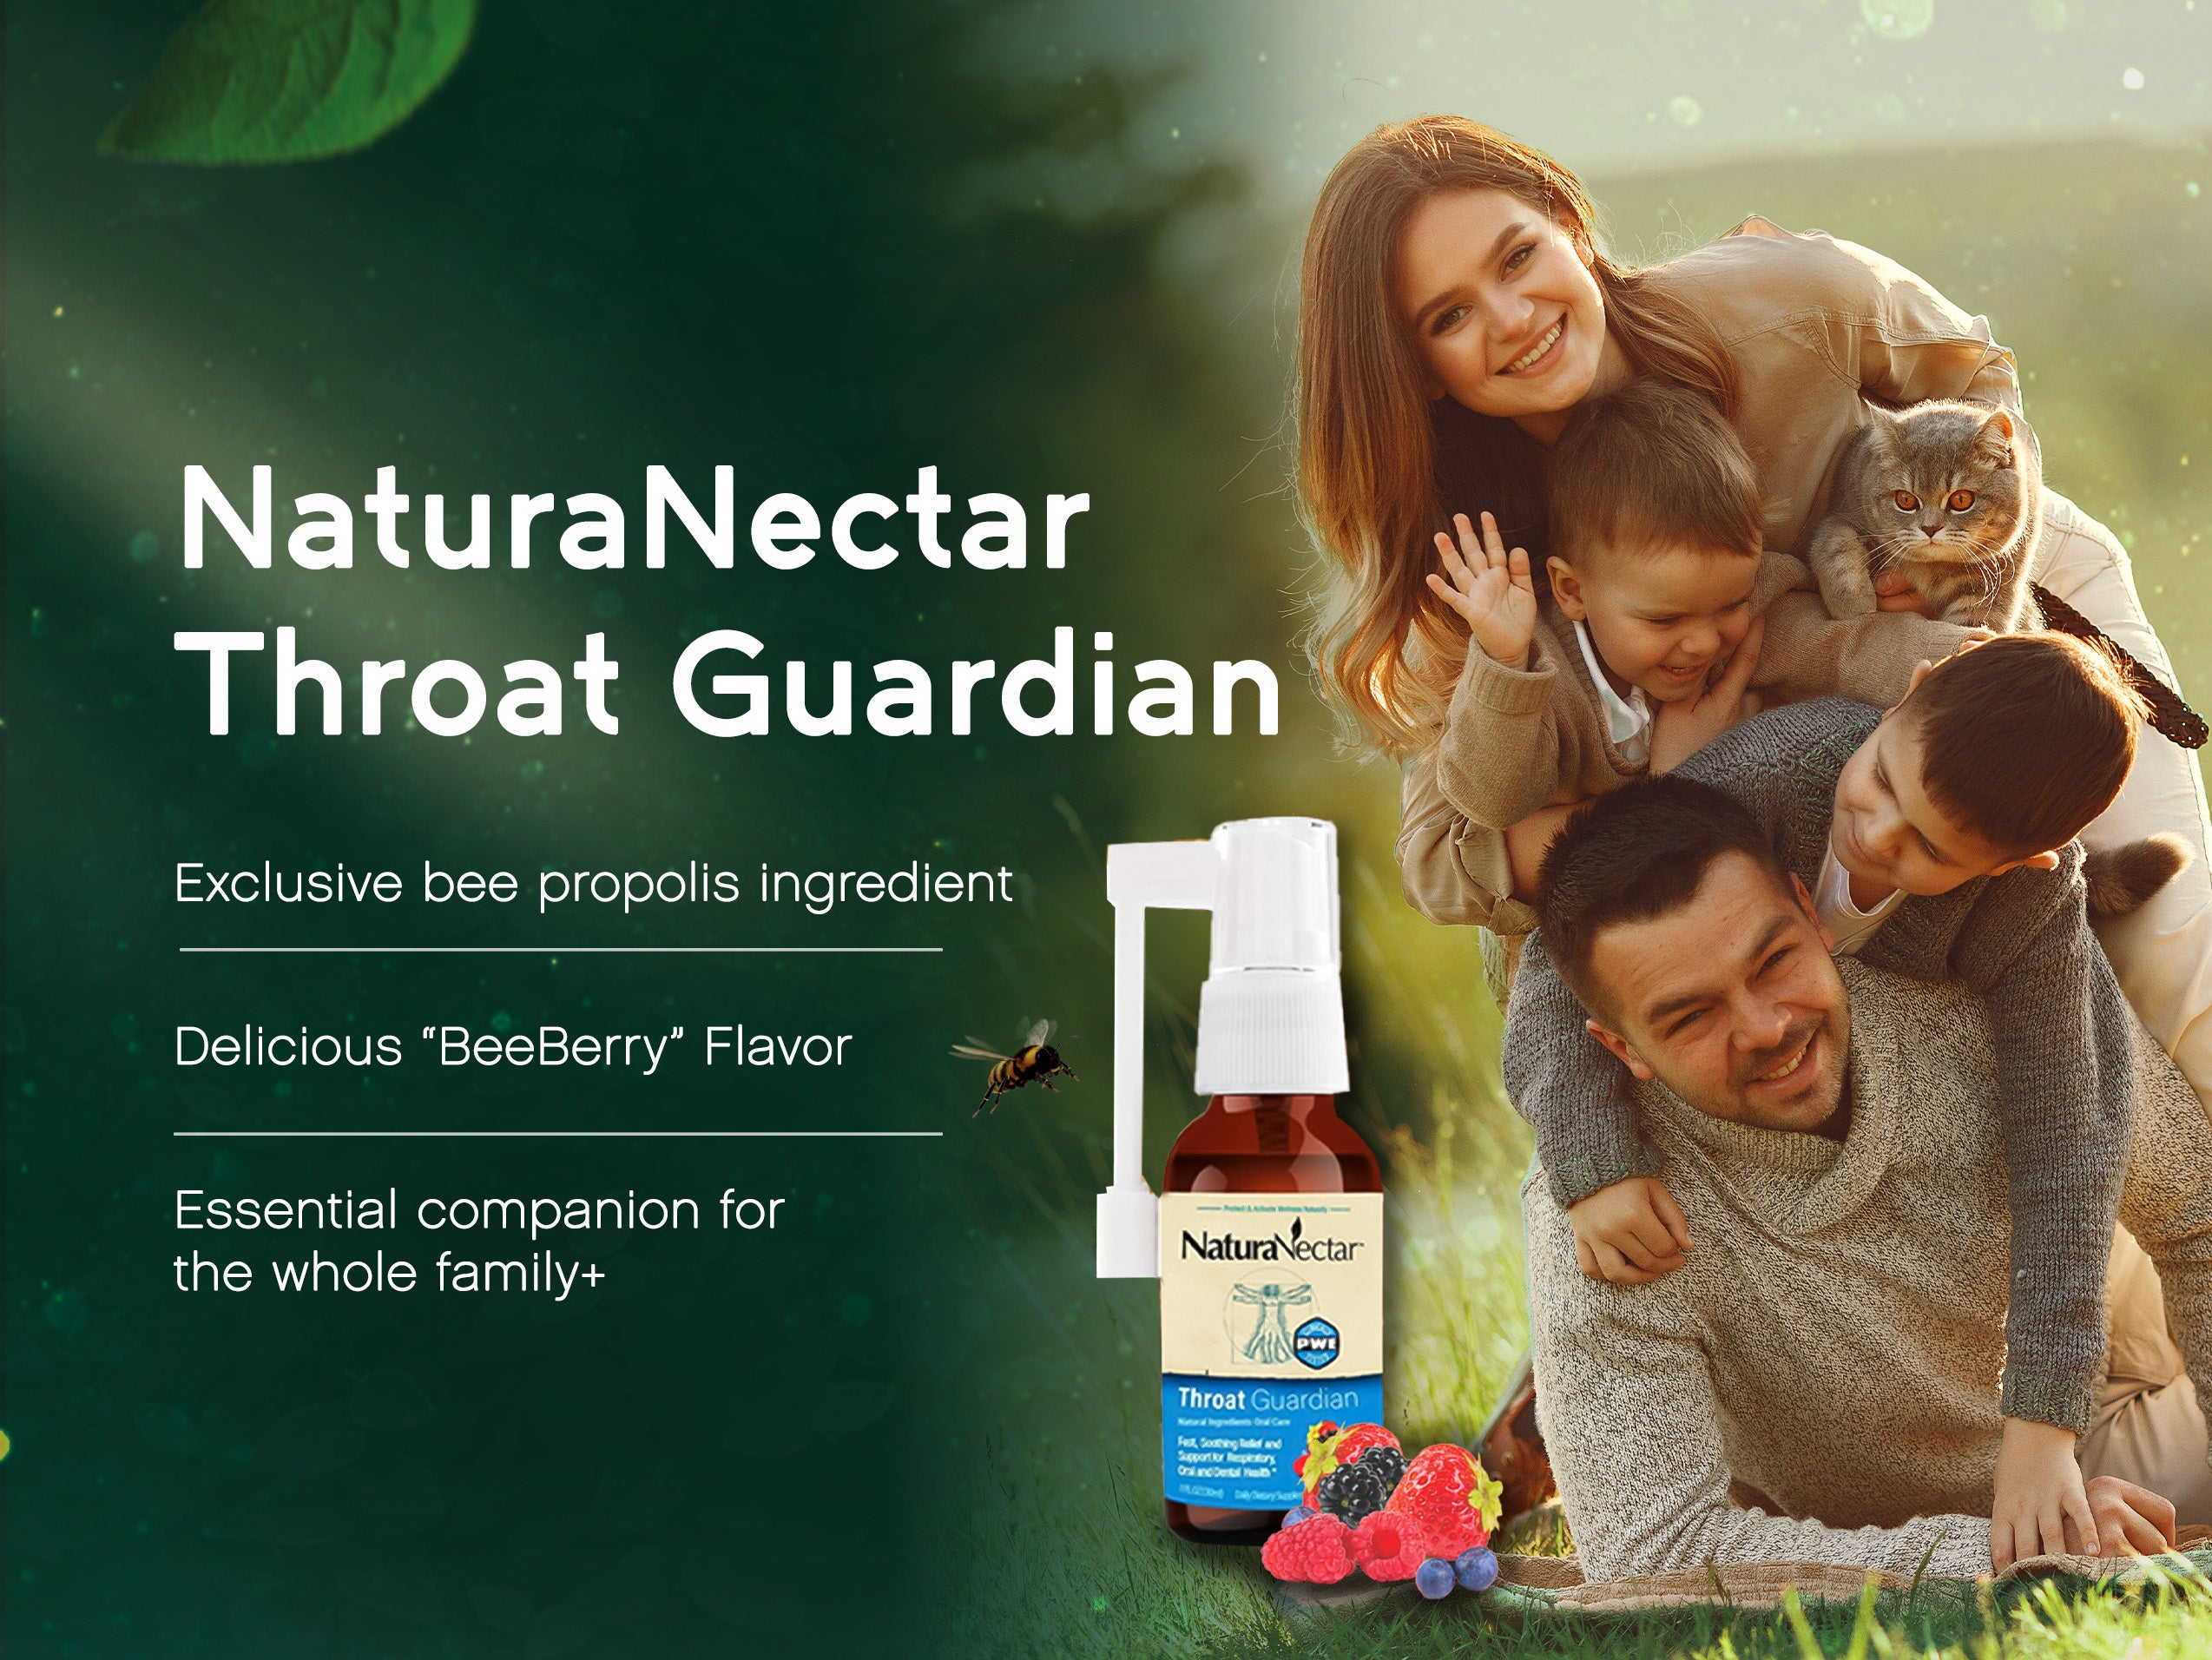 Throat Guardian Spray – Propolis organic aromatic acids to support throat health*, immune health*, and alleviate the effects of a raspy voice